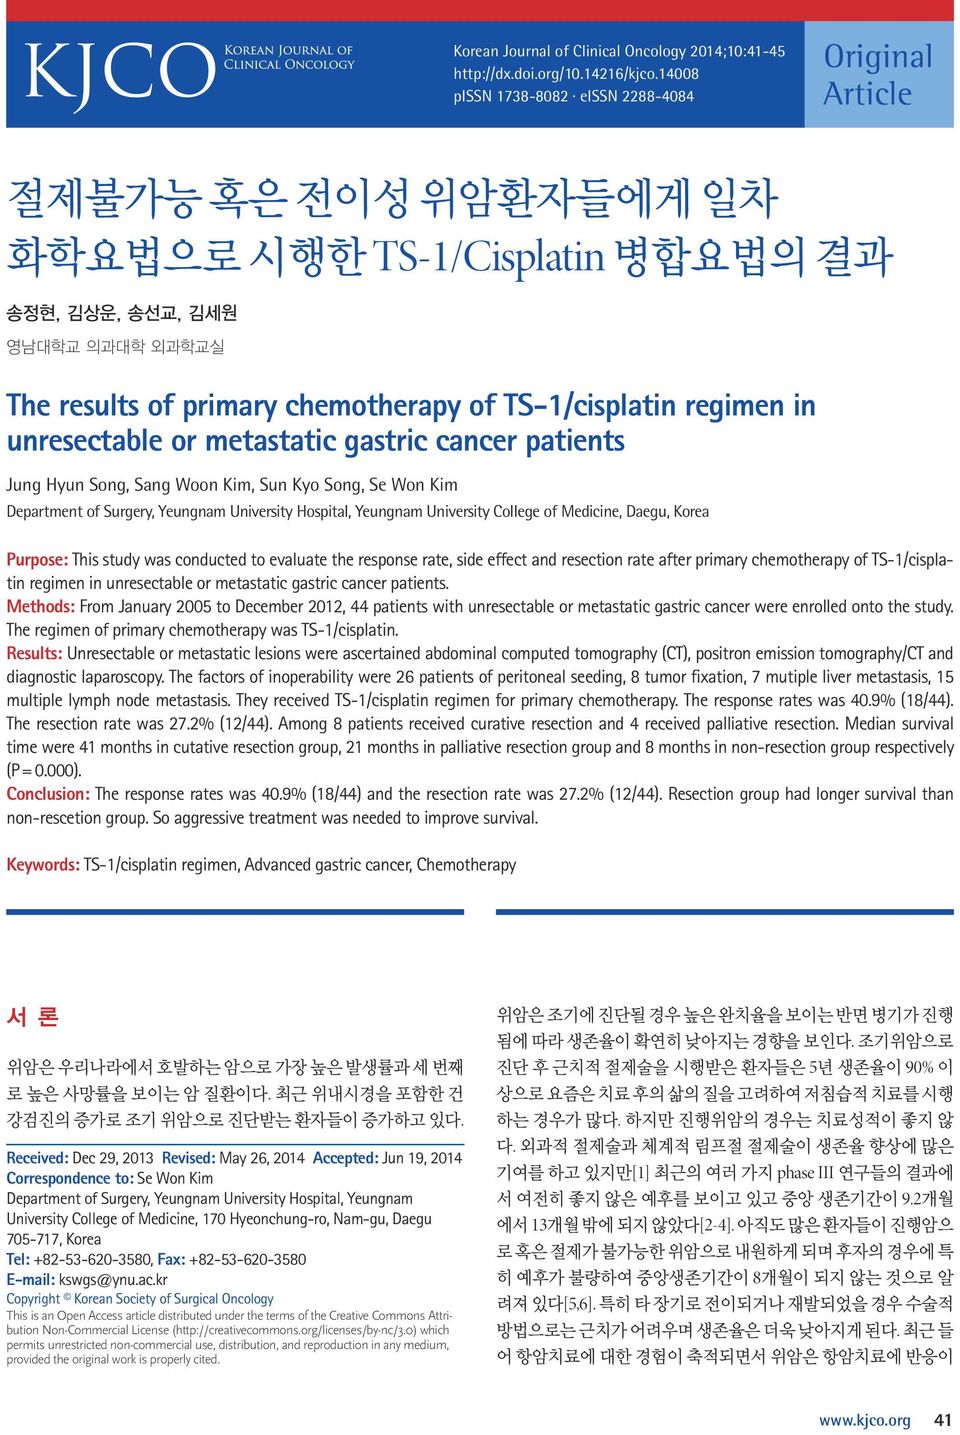 TS-1/cisplatin regimen in unresectable or metastatic gastric cancer patients Jung Hyun Song, Sang Woon Kim, Sun Kyo Song, Se Won Kim Department of Surgery, Yeungnam University Hospital, Yeungnam